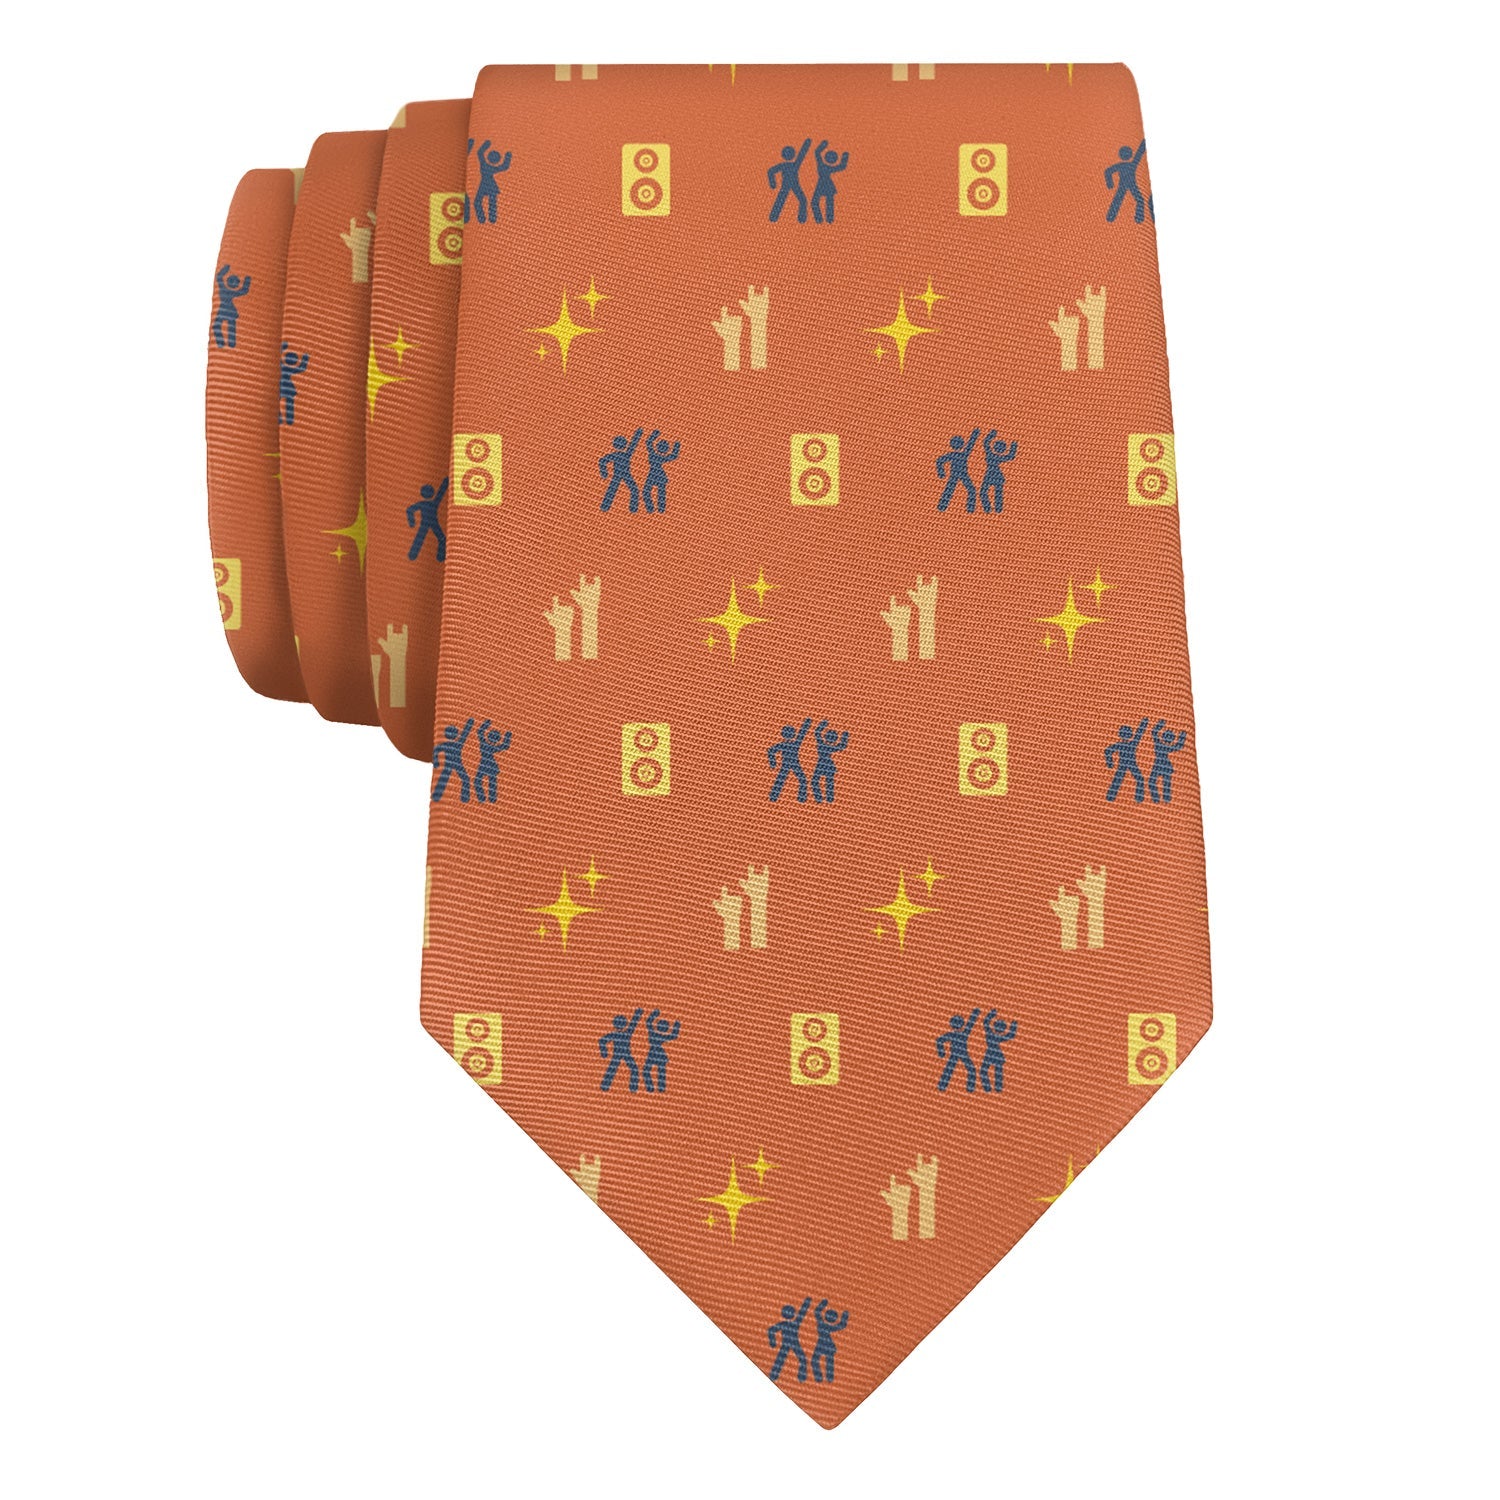 Concerts With Friends Necktie - Knotty 2.75" -  - Knotty Tie Co.